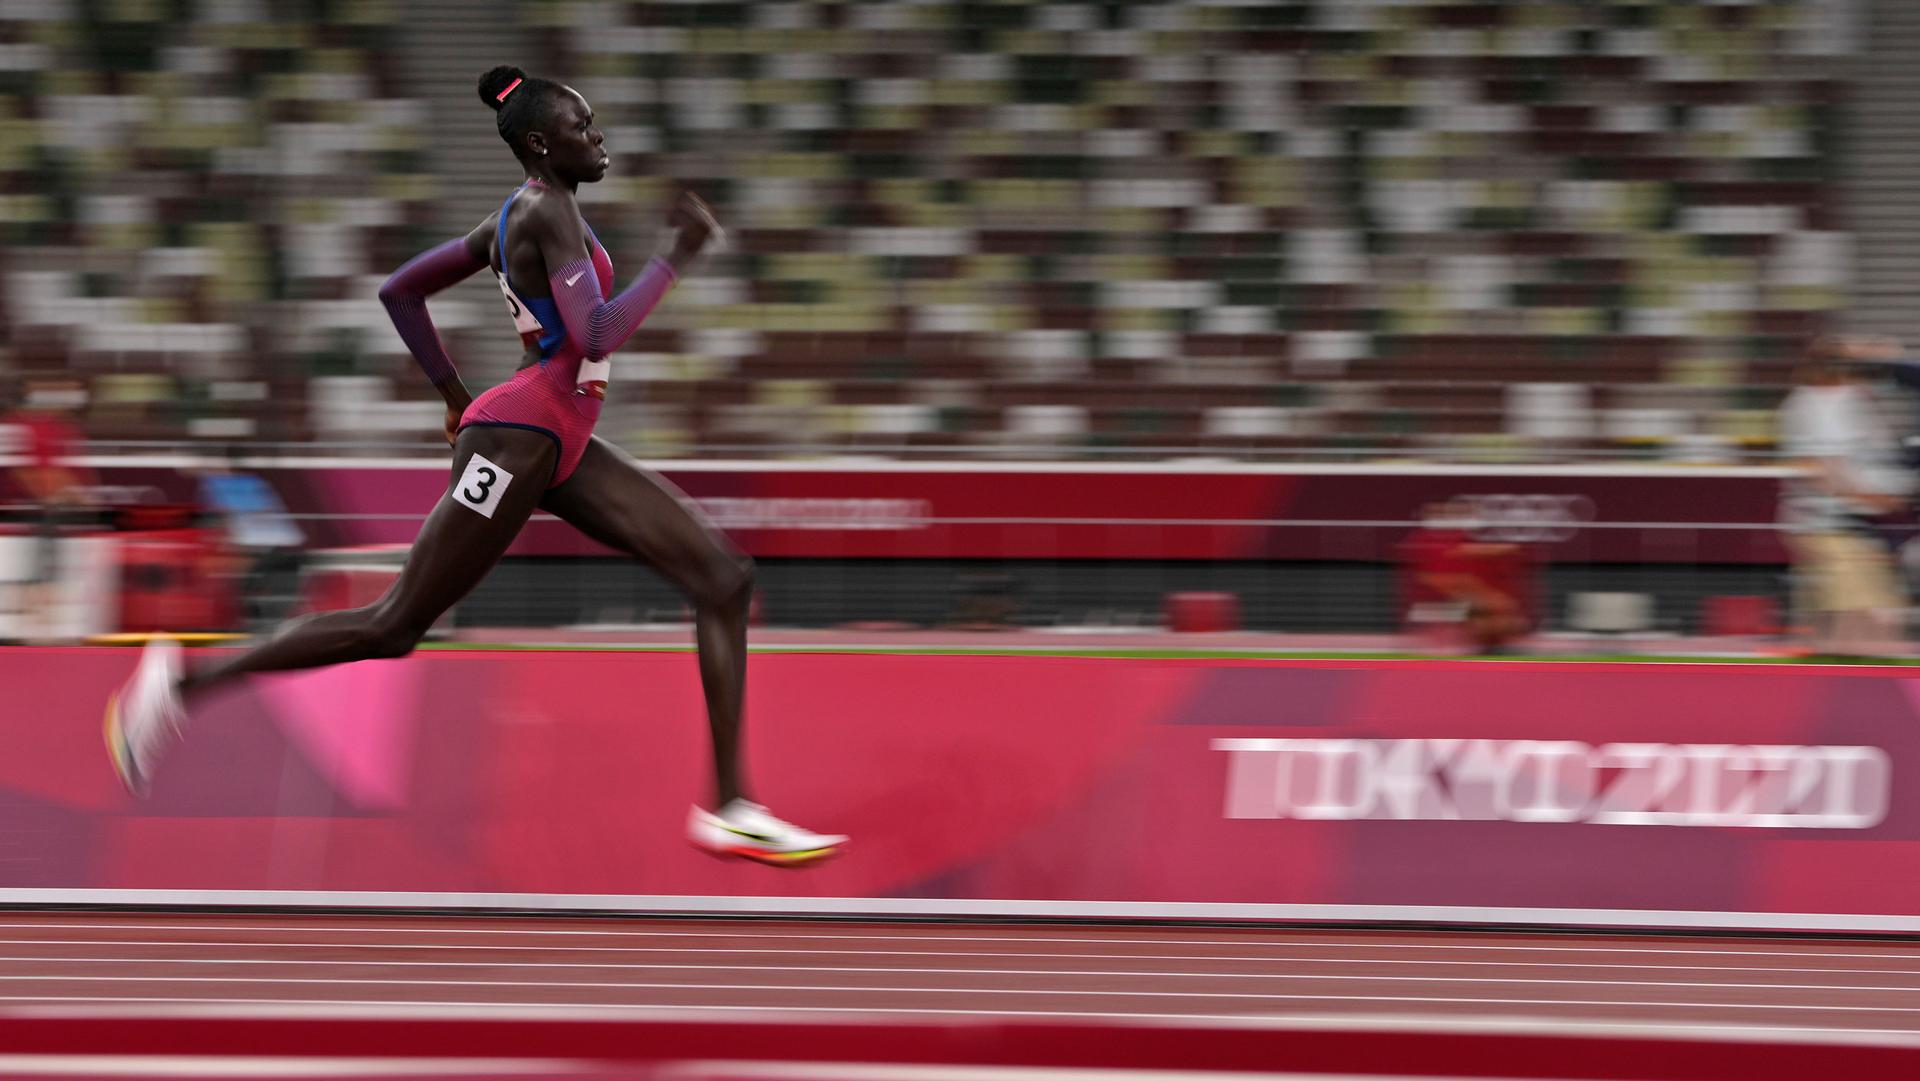 Athing Mu is shown mid-stride on the track in blurred motion.